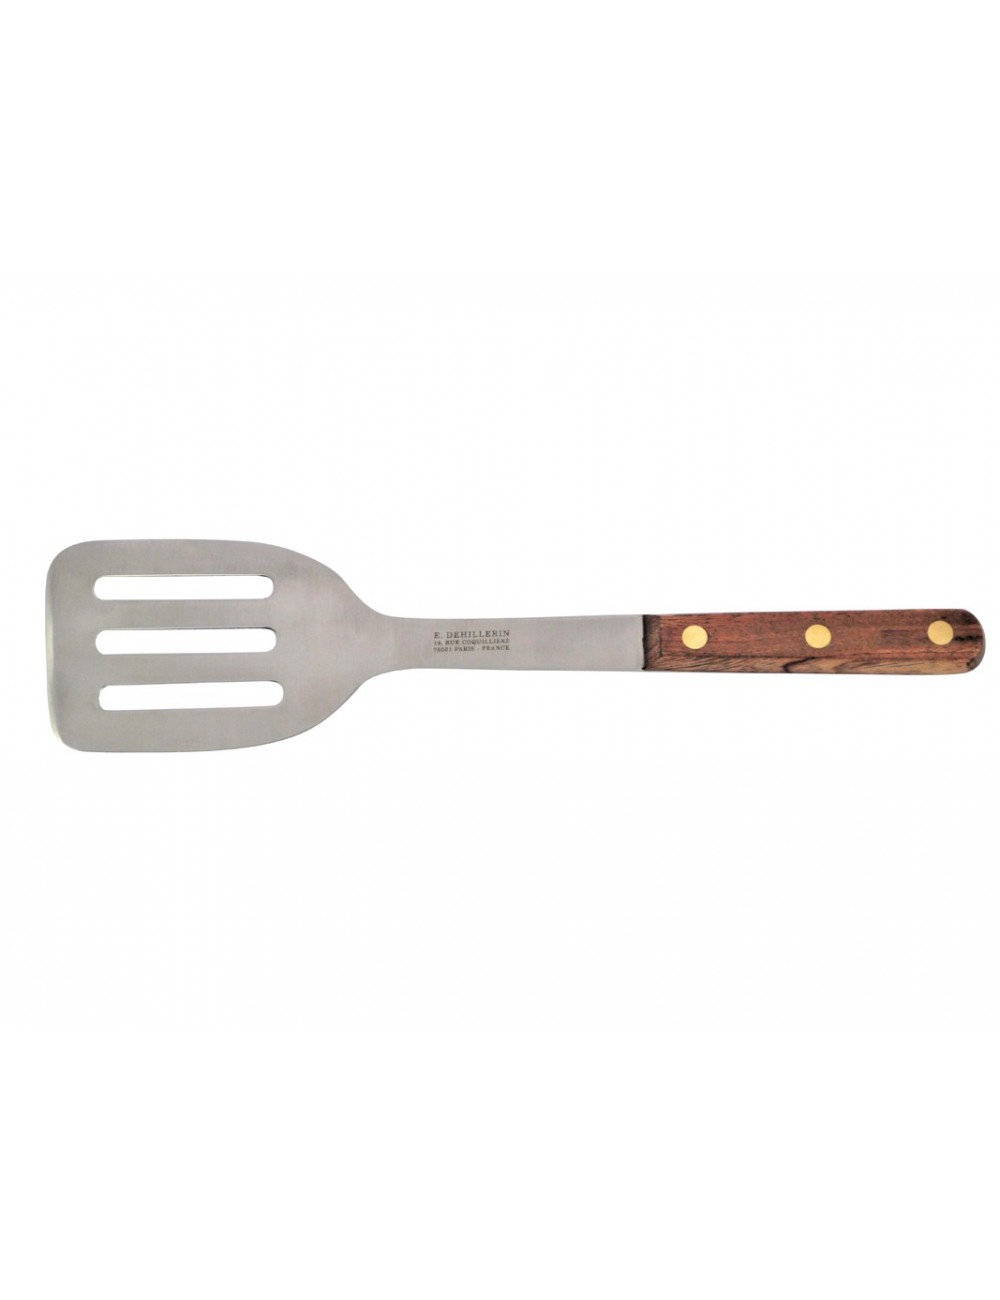 STAINLESS STEEL FRYING SPATULA - PURCHASE OF KITCHEN UTENSILS